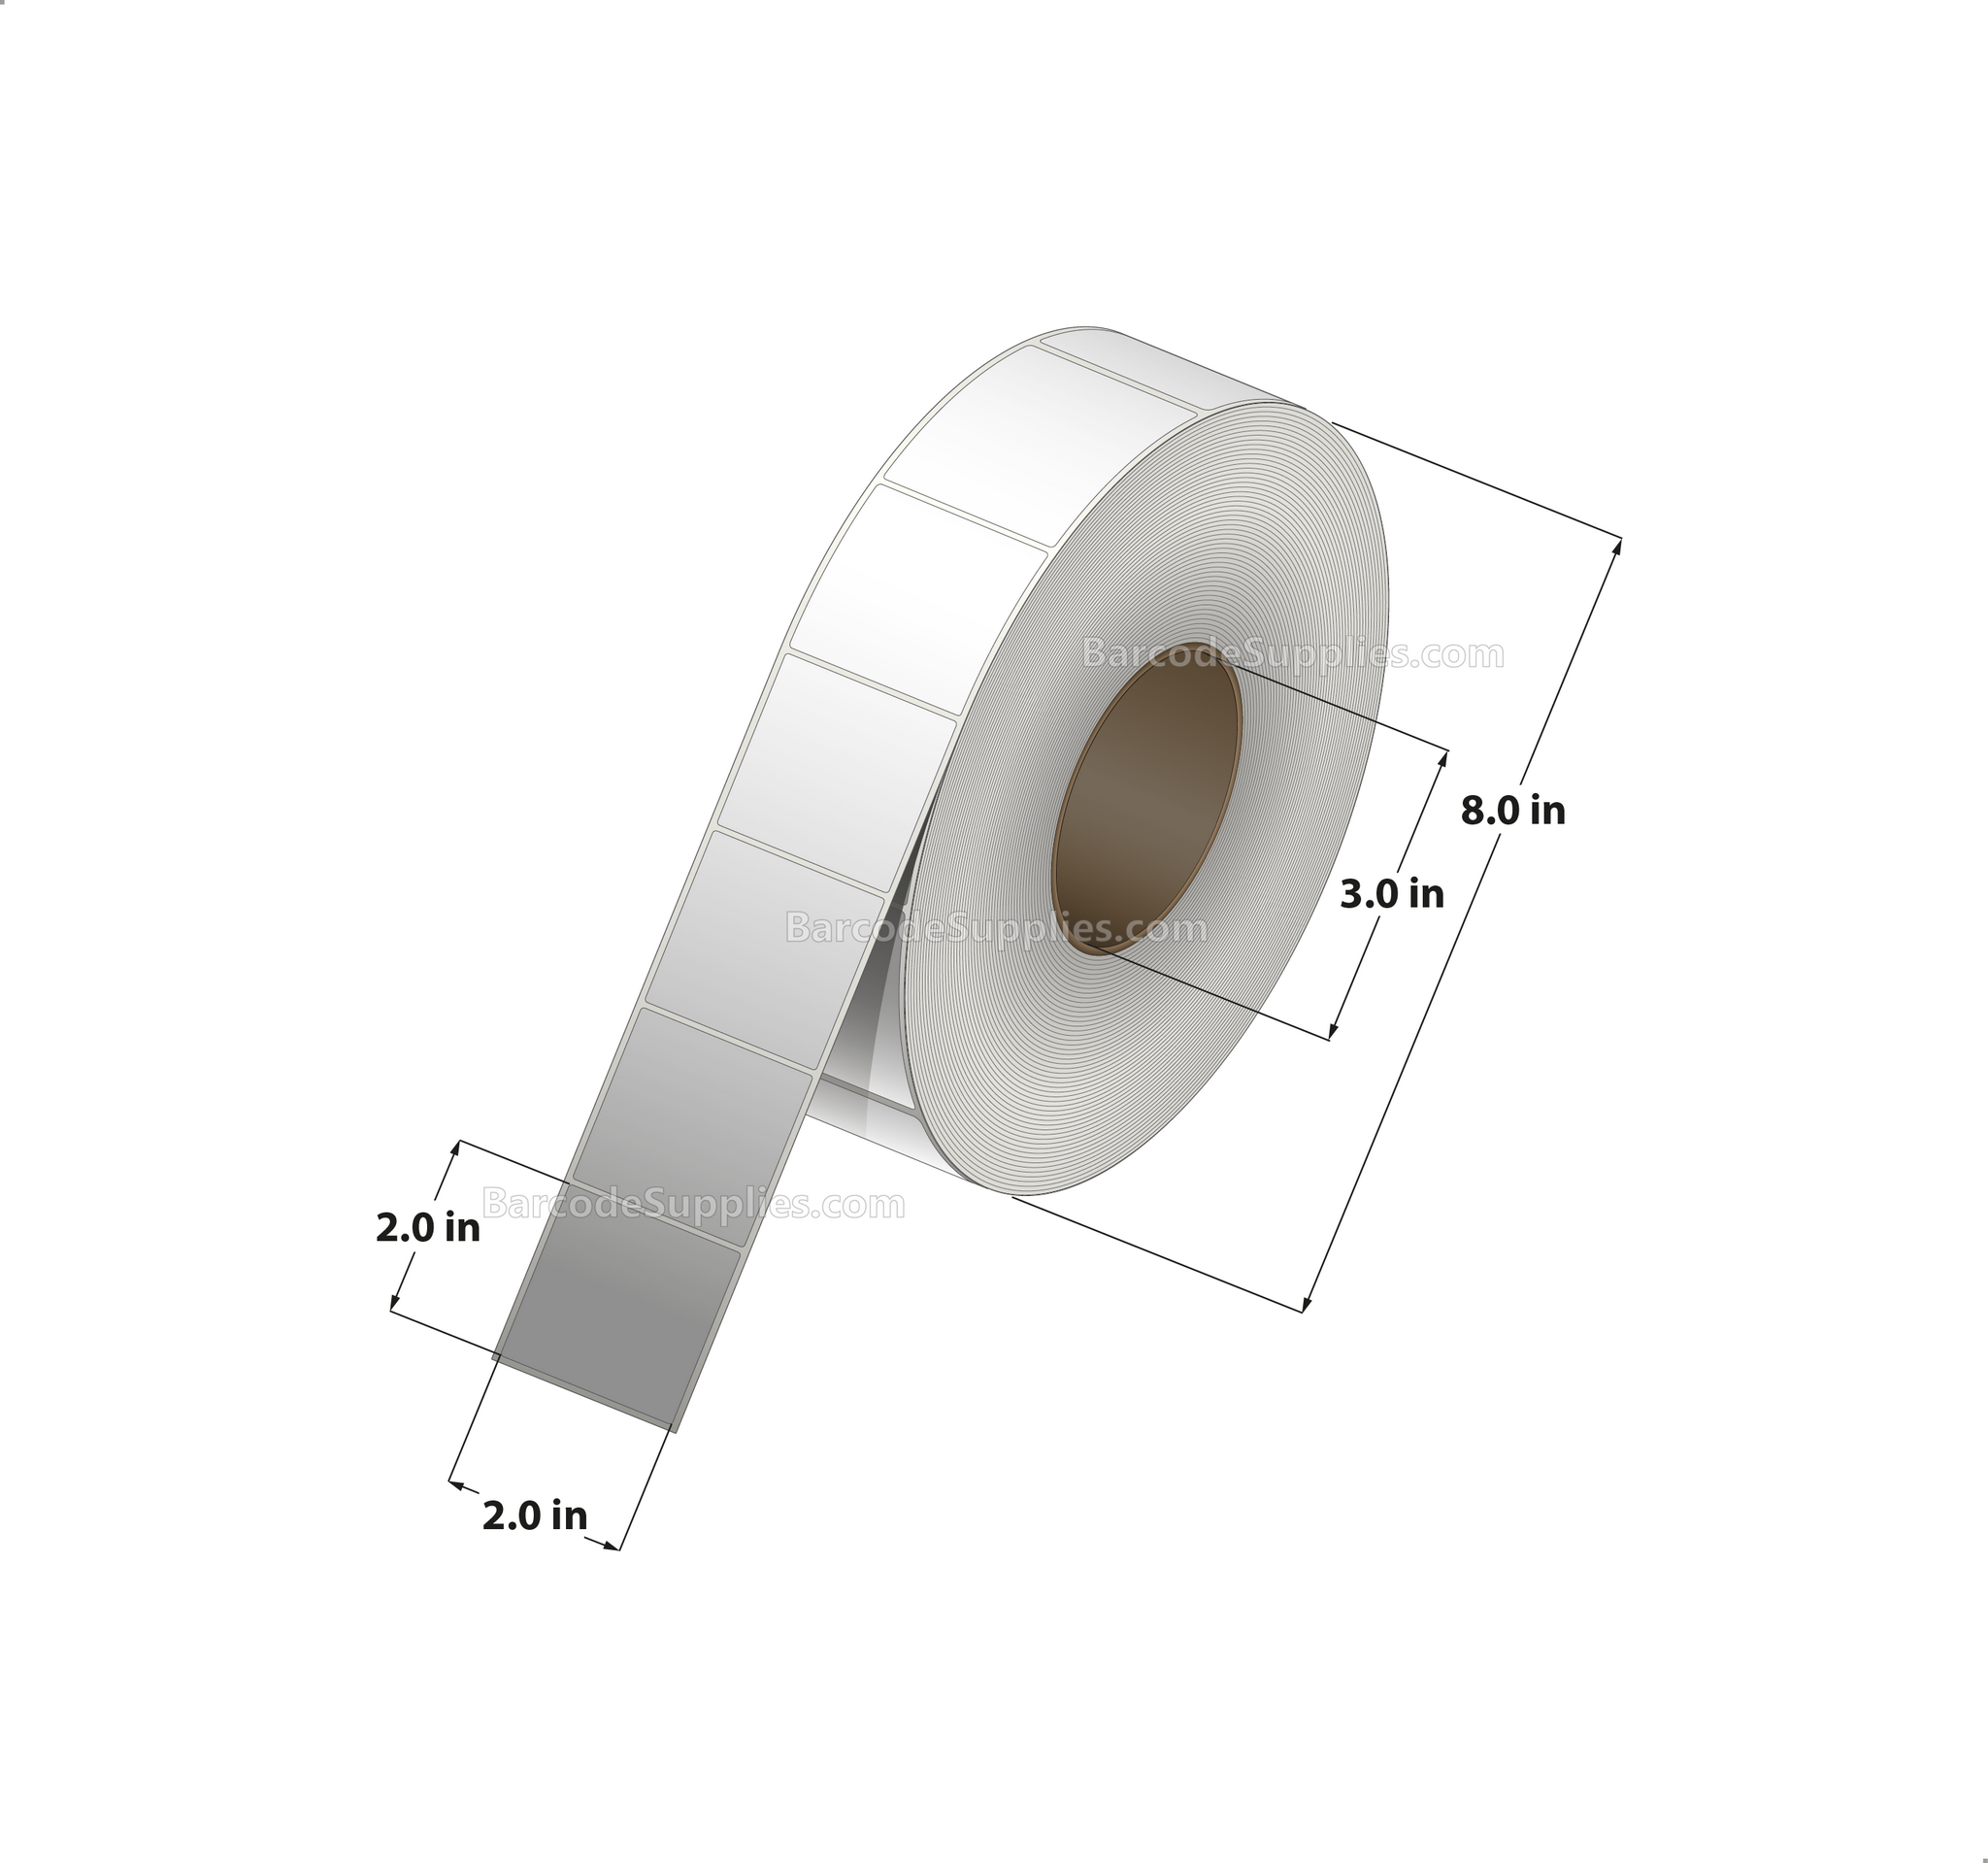 2 x 2 Direct Thermal White Labels With Acrylic Adhesive - Perforated - 735 Labels Per Roll - Carton Of 12 Rolls - 8820 Labels Total - MPN: RD-2-2-735-1